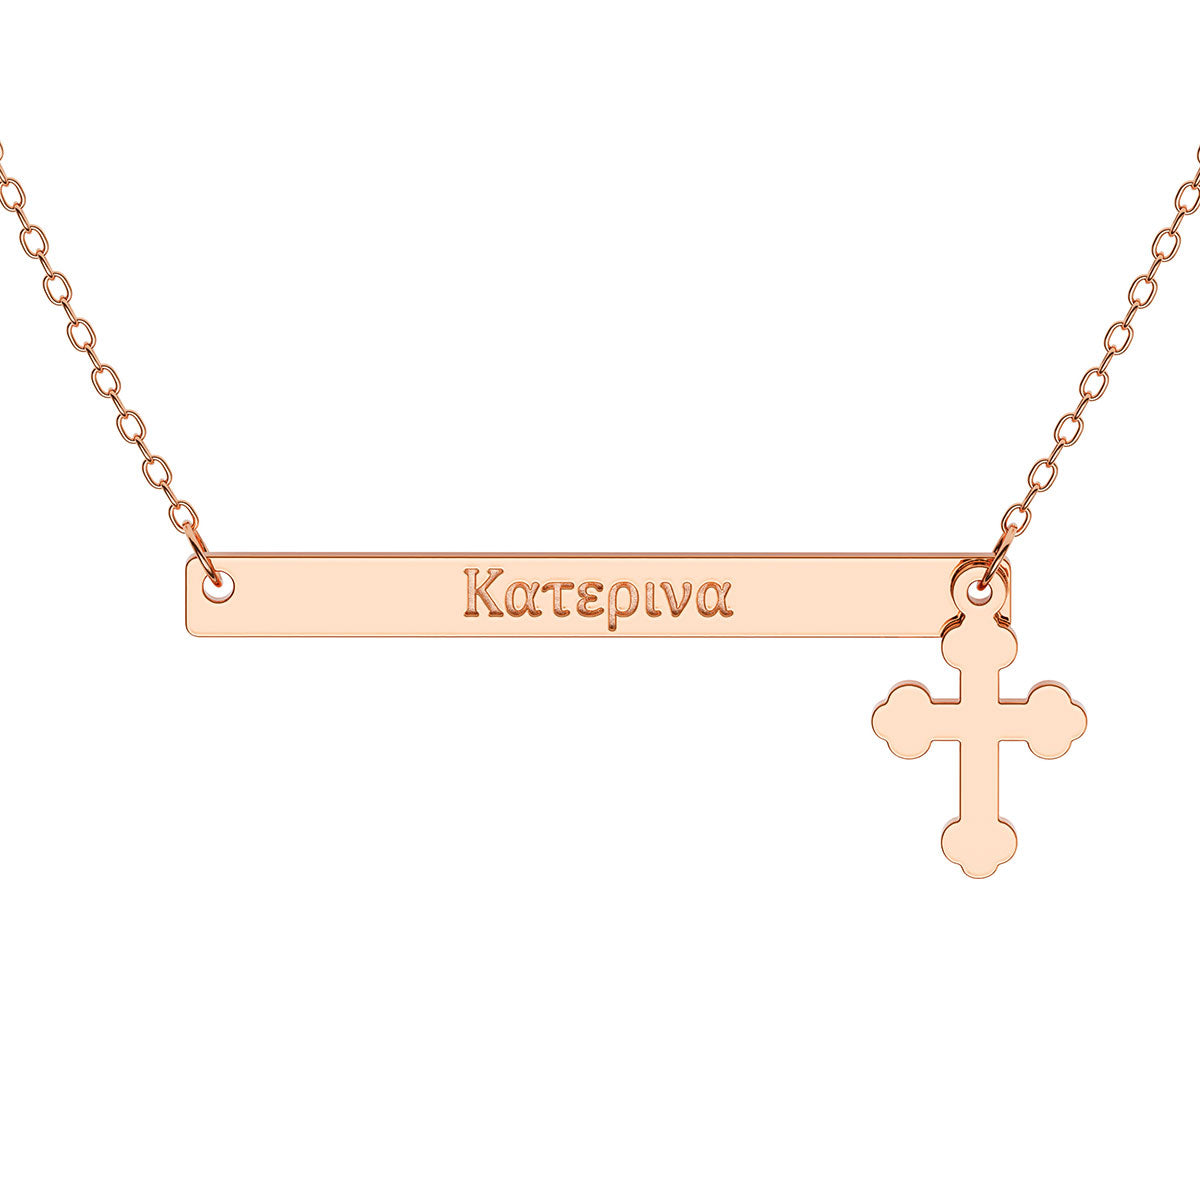 Narrow Horizontal Bar Necklace with Greek Engraving and Cross Charm